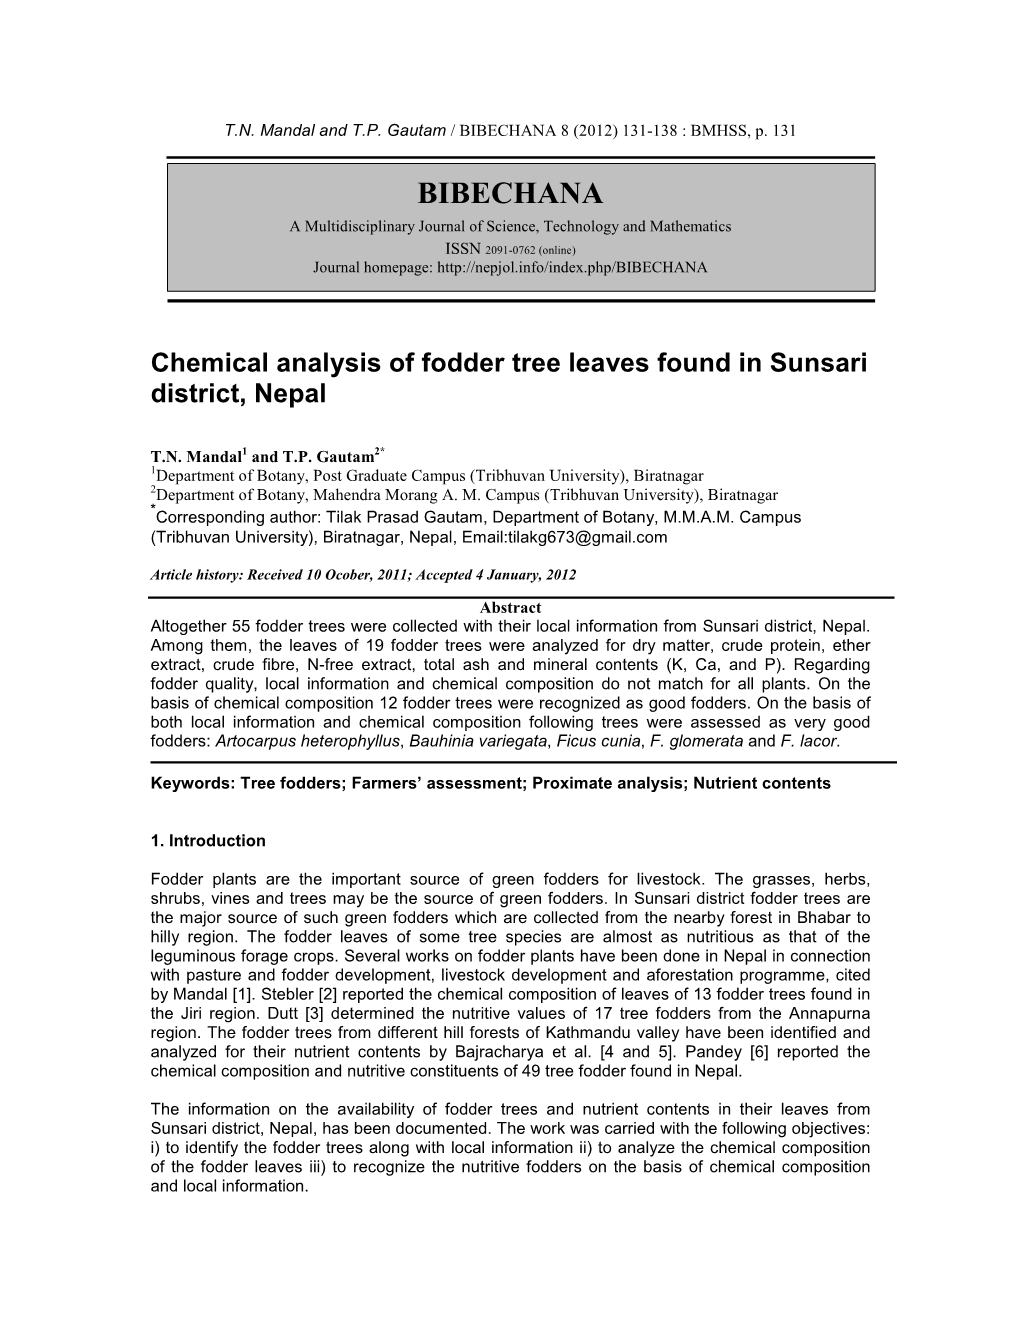 Chemical Analysis of Fodder Tree Leaves Found in Sunsari District, Nepal